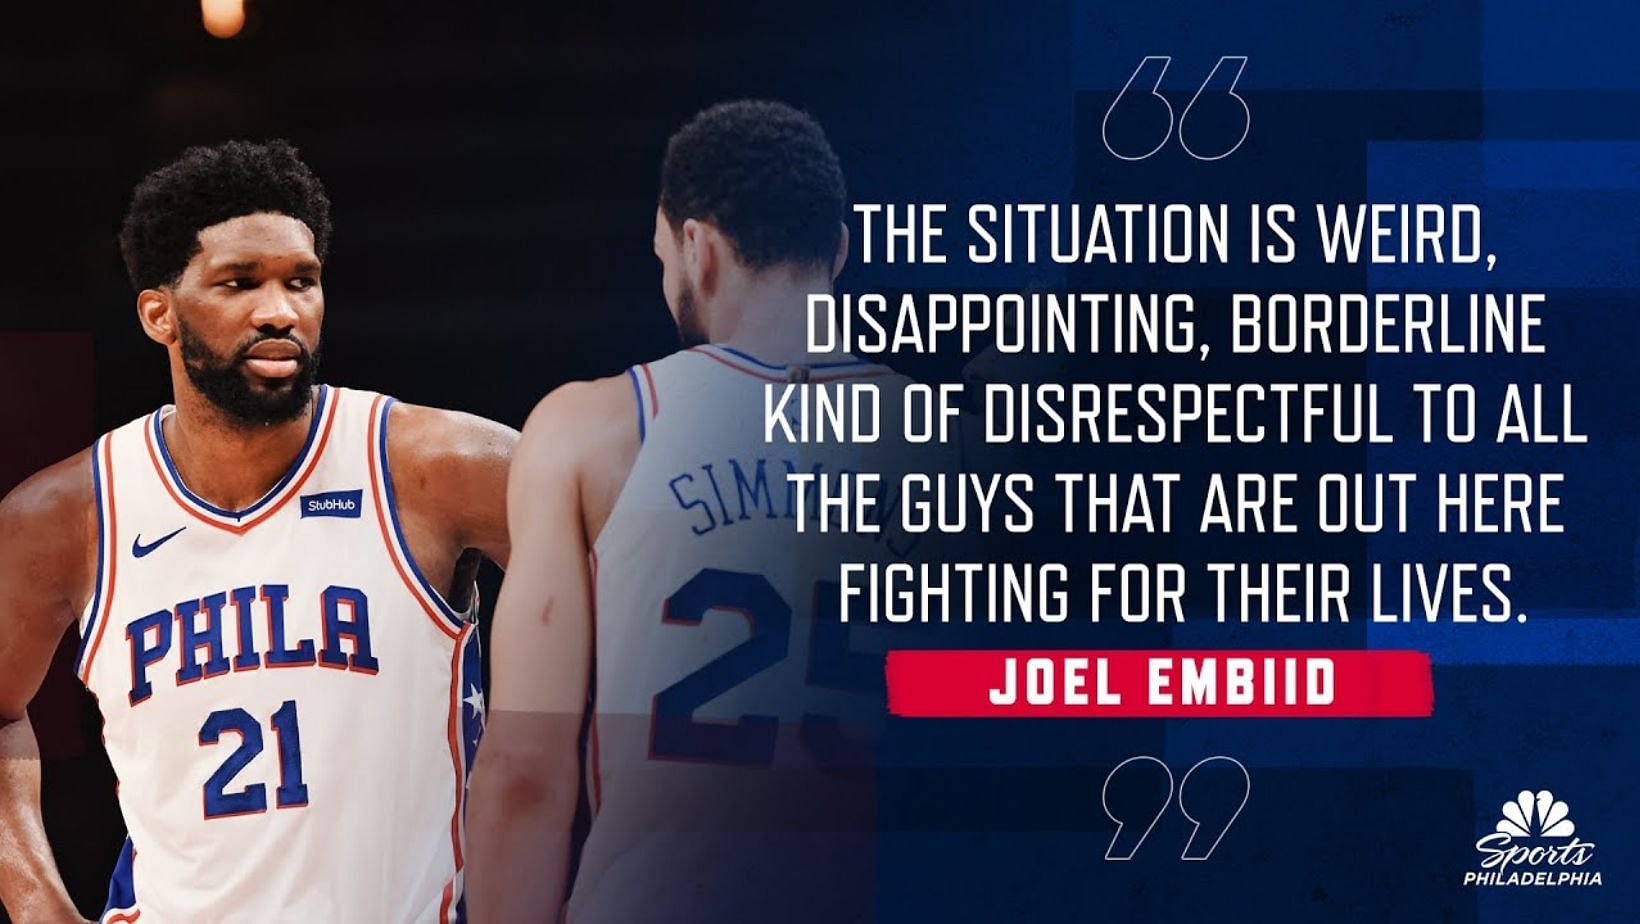 Reigning NBA MVP Joel Embiid and former teammate Ben Simmons are likely not going to patch up their relationship.